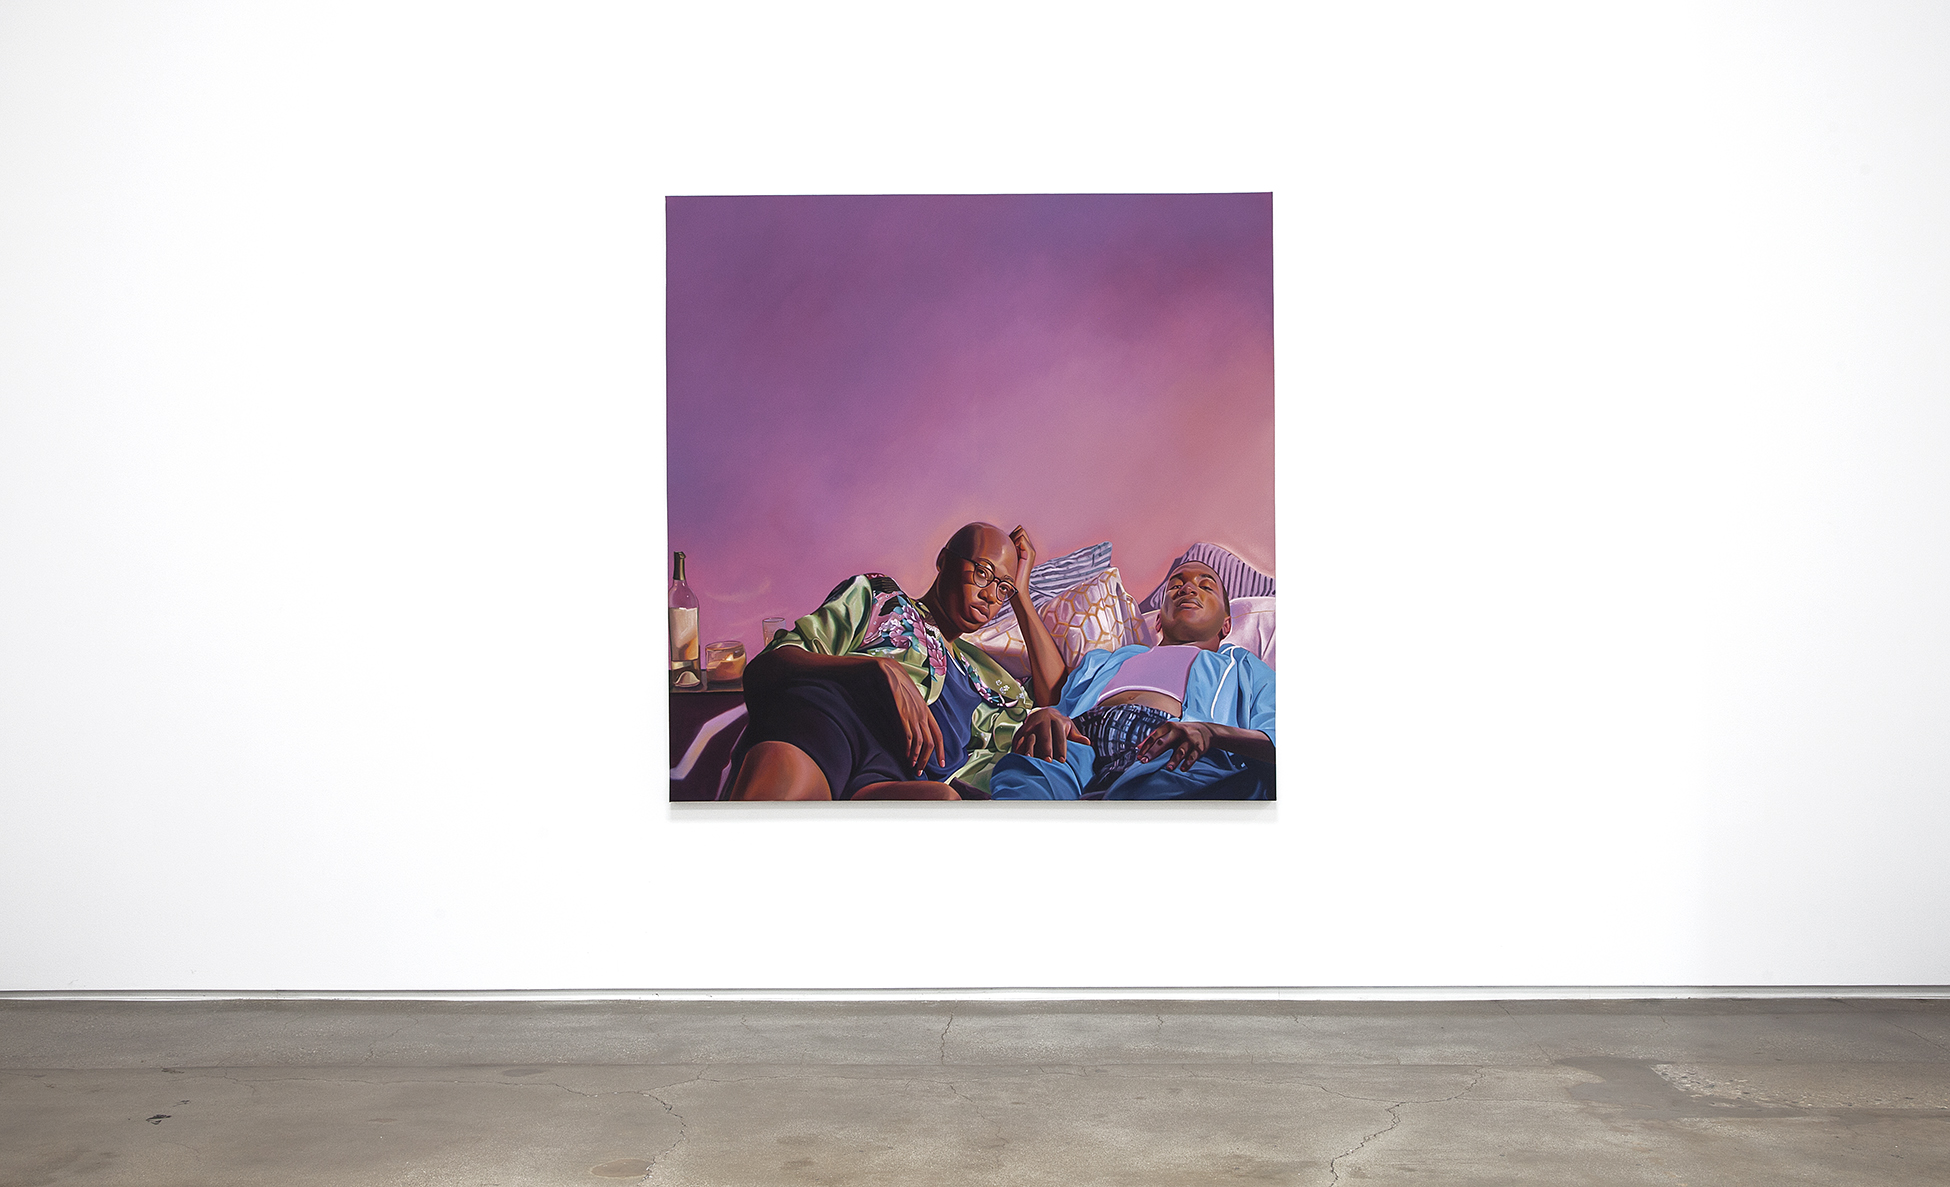 Jarvis Boyland, "On Hold," Installation view